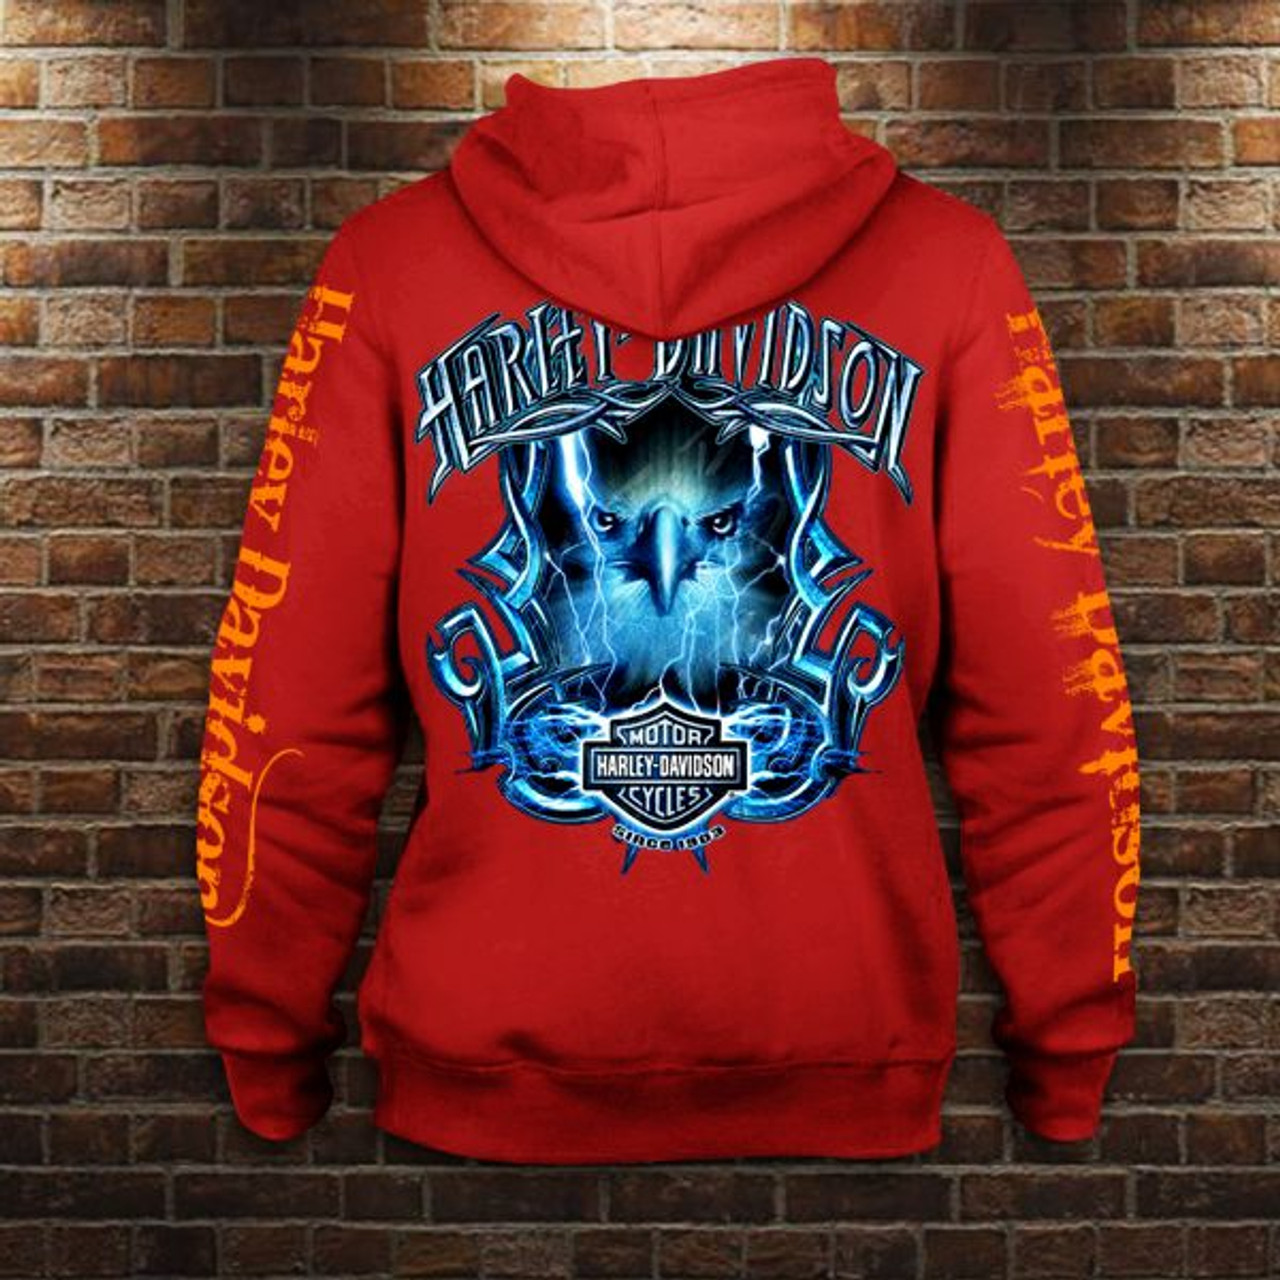  **(OFFICIAL-HARLEY-DAVIDSON-MOTORCYCLE-PULLOVER-HOODIES/LIVE-TO-RIDE & RIDE-TO-LIVE/NEW-3D-CUSTOM-GRAPHIC-PRINTED & DOUBLE-SIDED-ALL-OVER-DESIGN/CLASSIC-OFFICIAL-CUSTOM-HARLEY-LOGOS & OFFICIAL-HARLEY-BLACK & ORANGE-COLORS/PREMIUM-PULLOVER-HOODIES)**